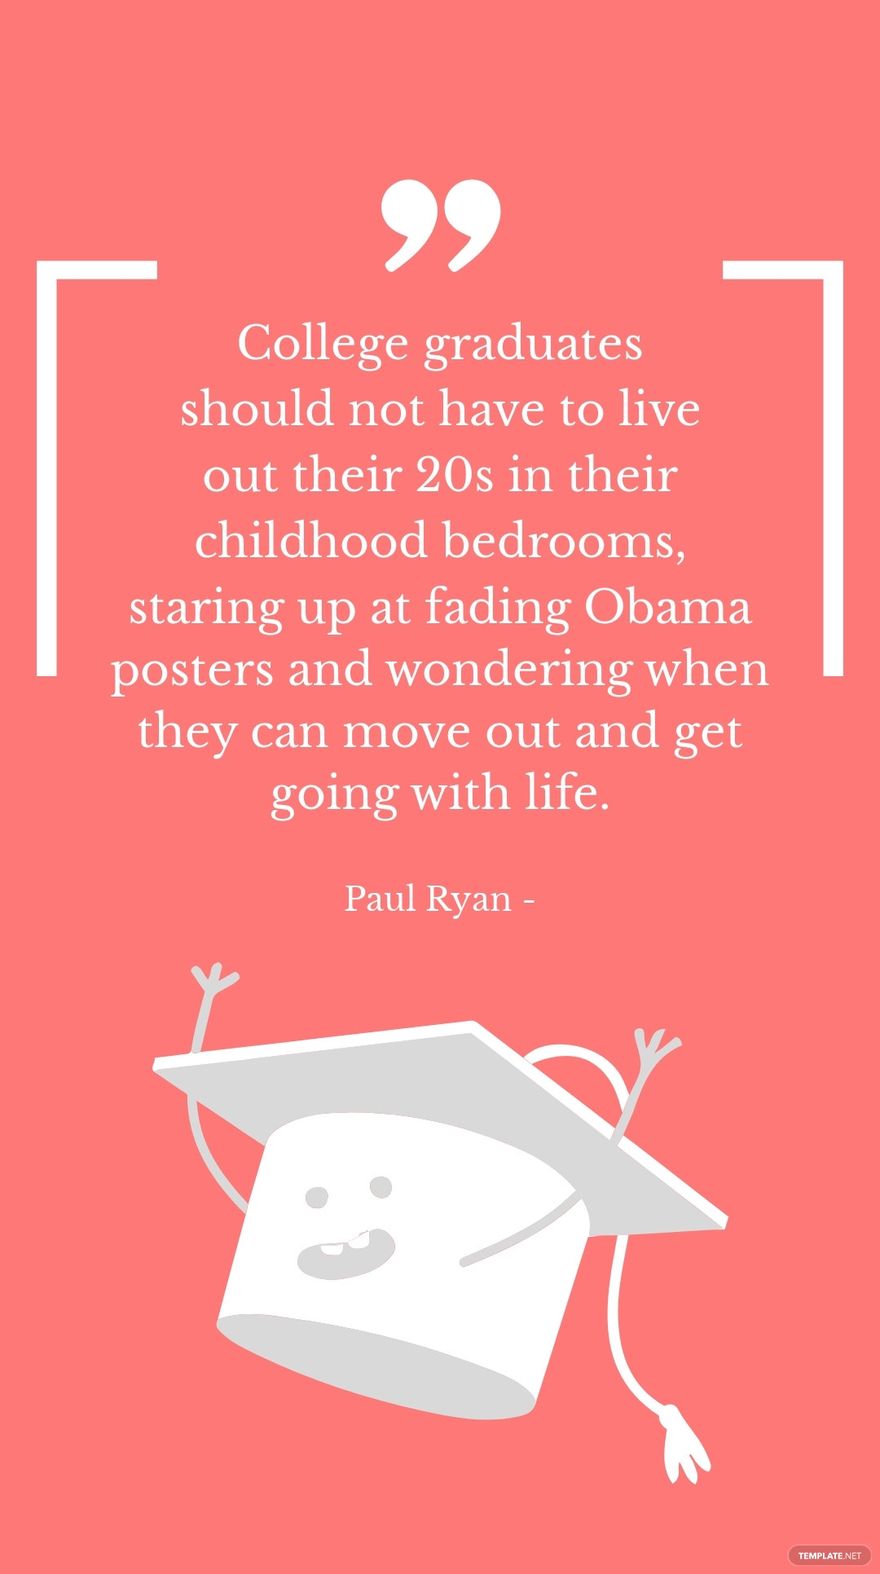 Free Paul Ryan - College graduates should not have to live out their 20s in their childhood bedrooms, staring up at fading Obama posters and wondering when they can move out and get going with life. in JPG